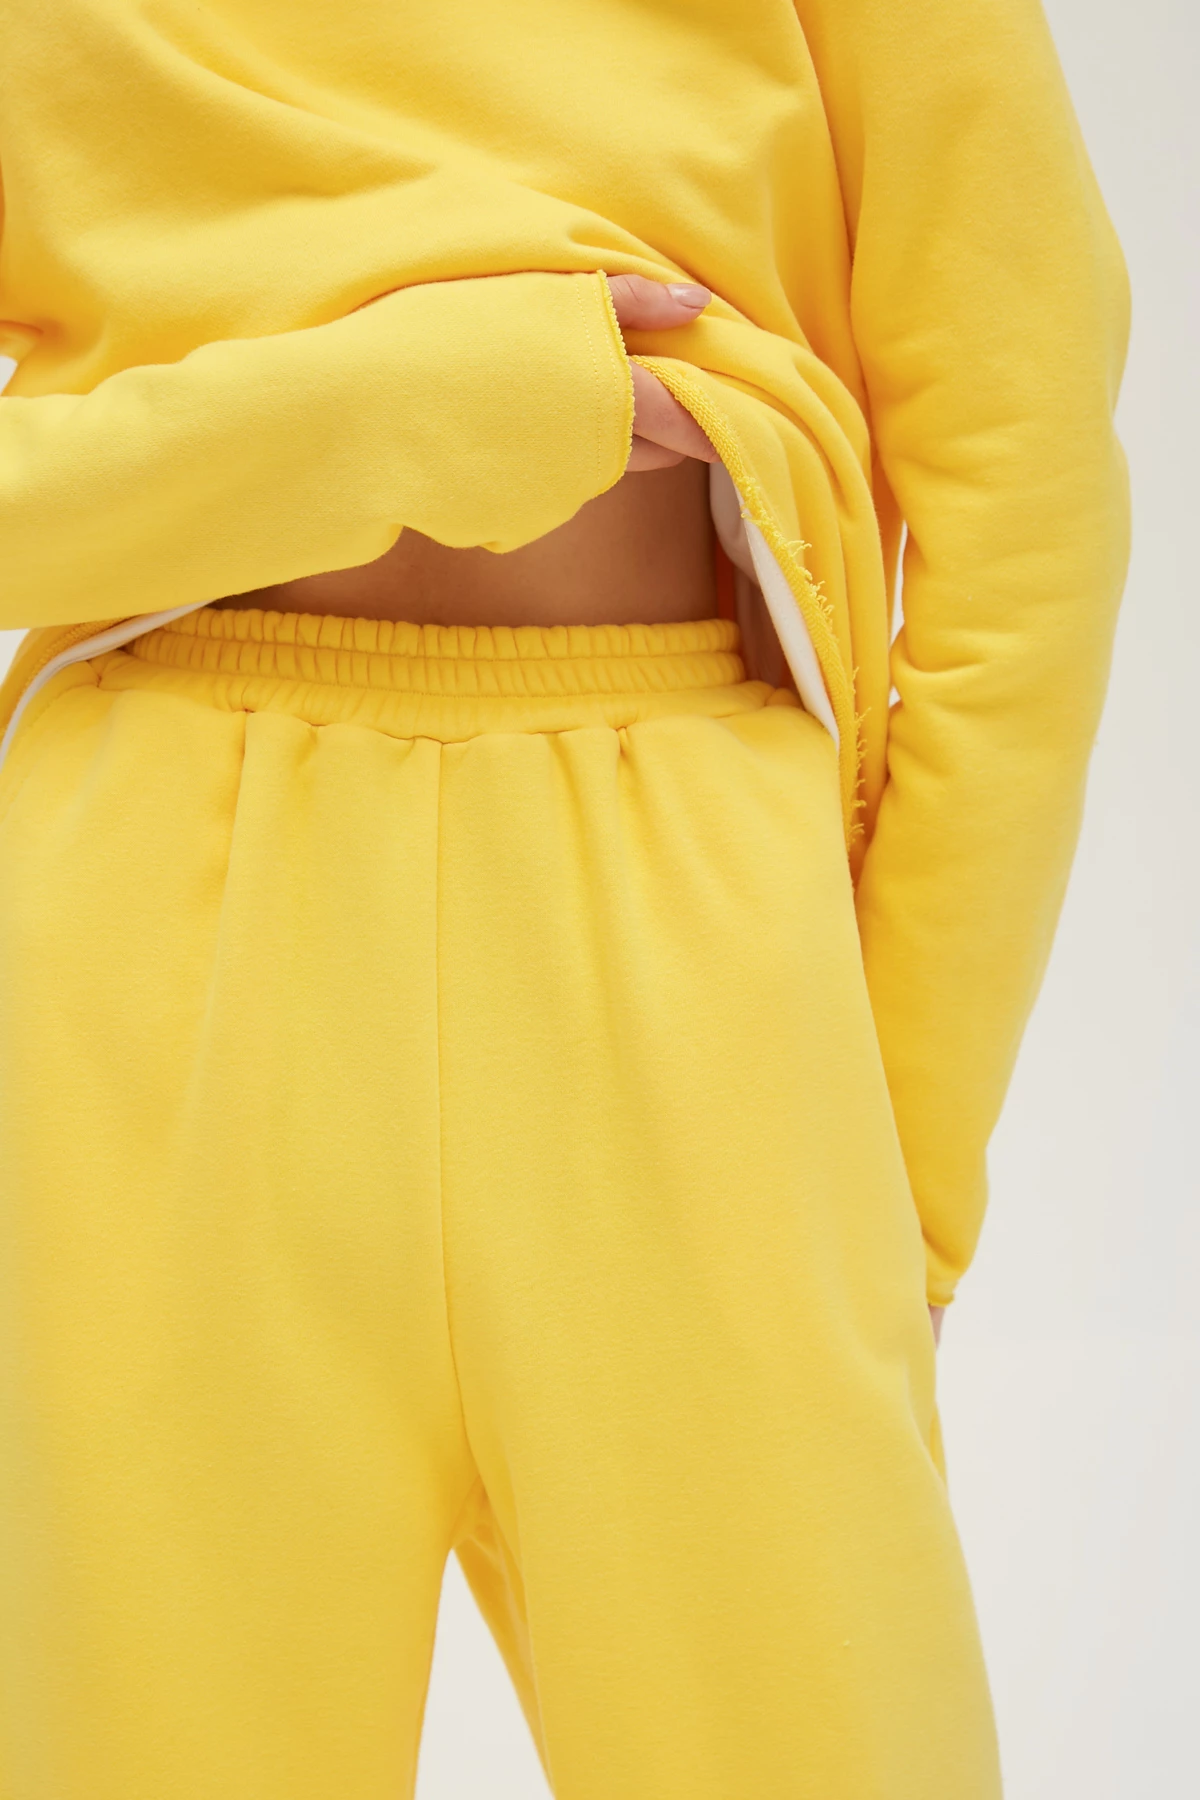 Yellow cropped pants made of knitwear, photo 4